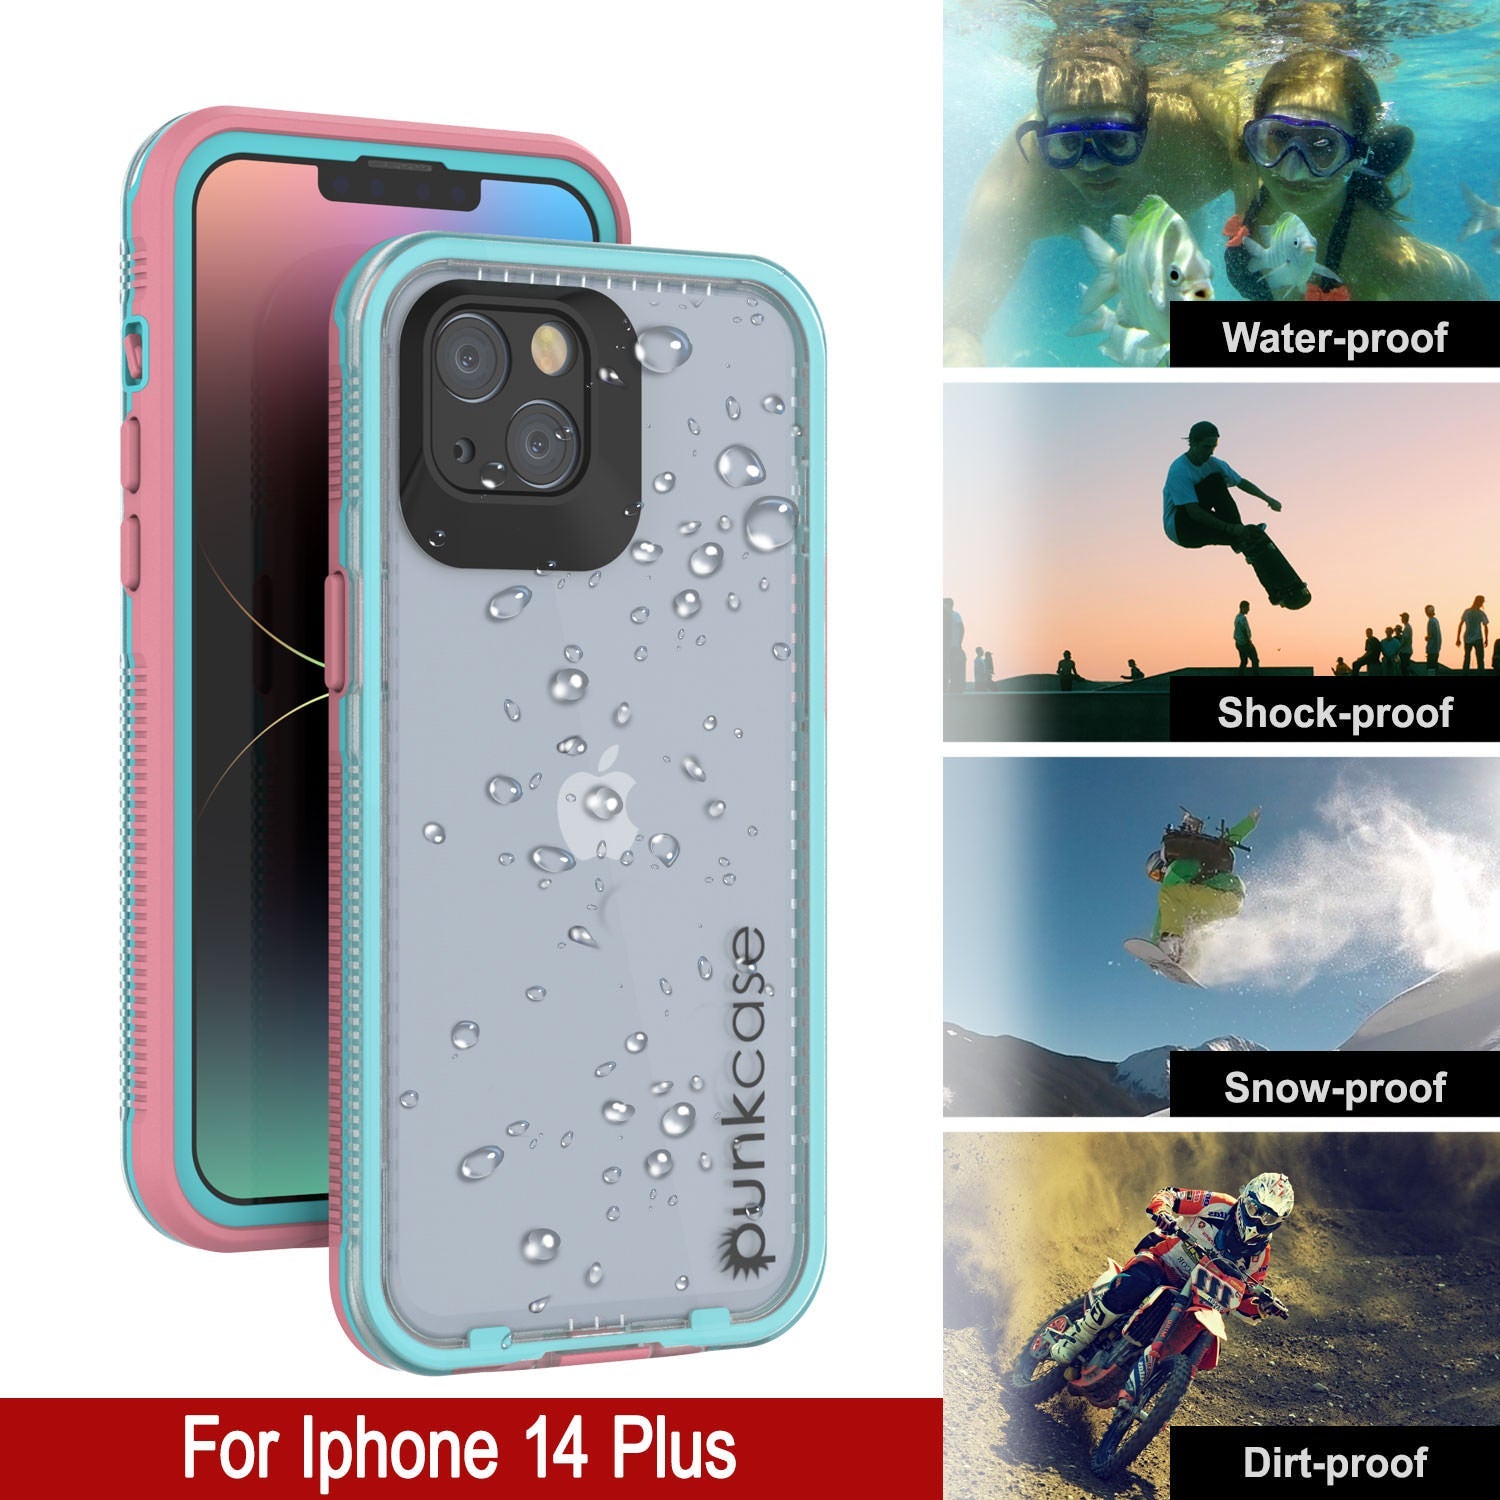 Punkcase iPhone 14 Plus Waterproof Case [Aqua Series] Armor Cover [Clear Pink] [Clear Back]